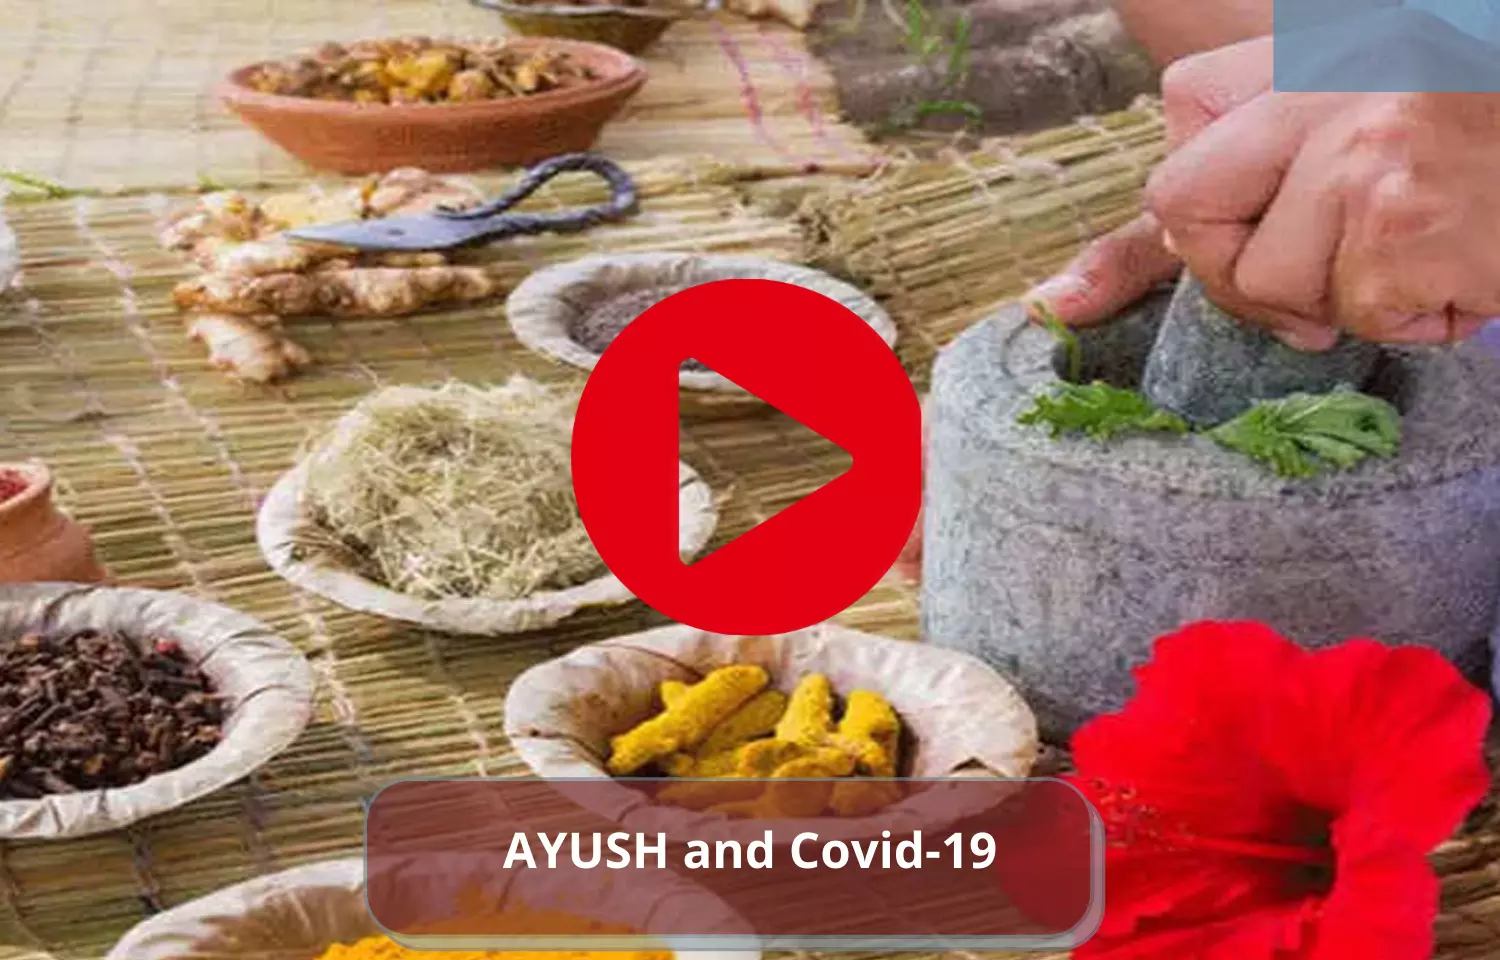 Journal Club - AYUSH and Covid-19, a hope